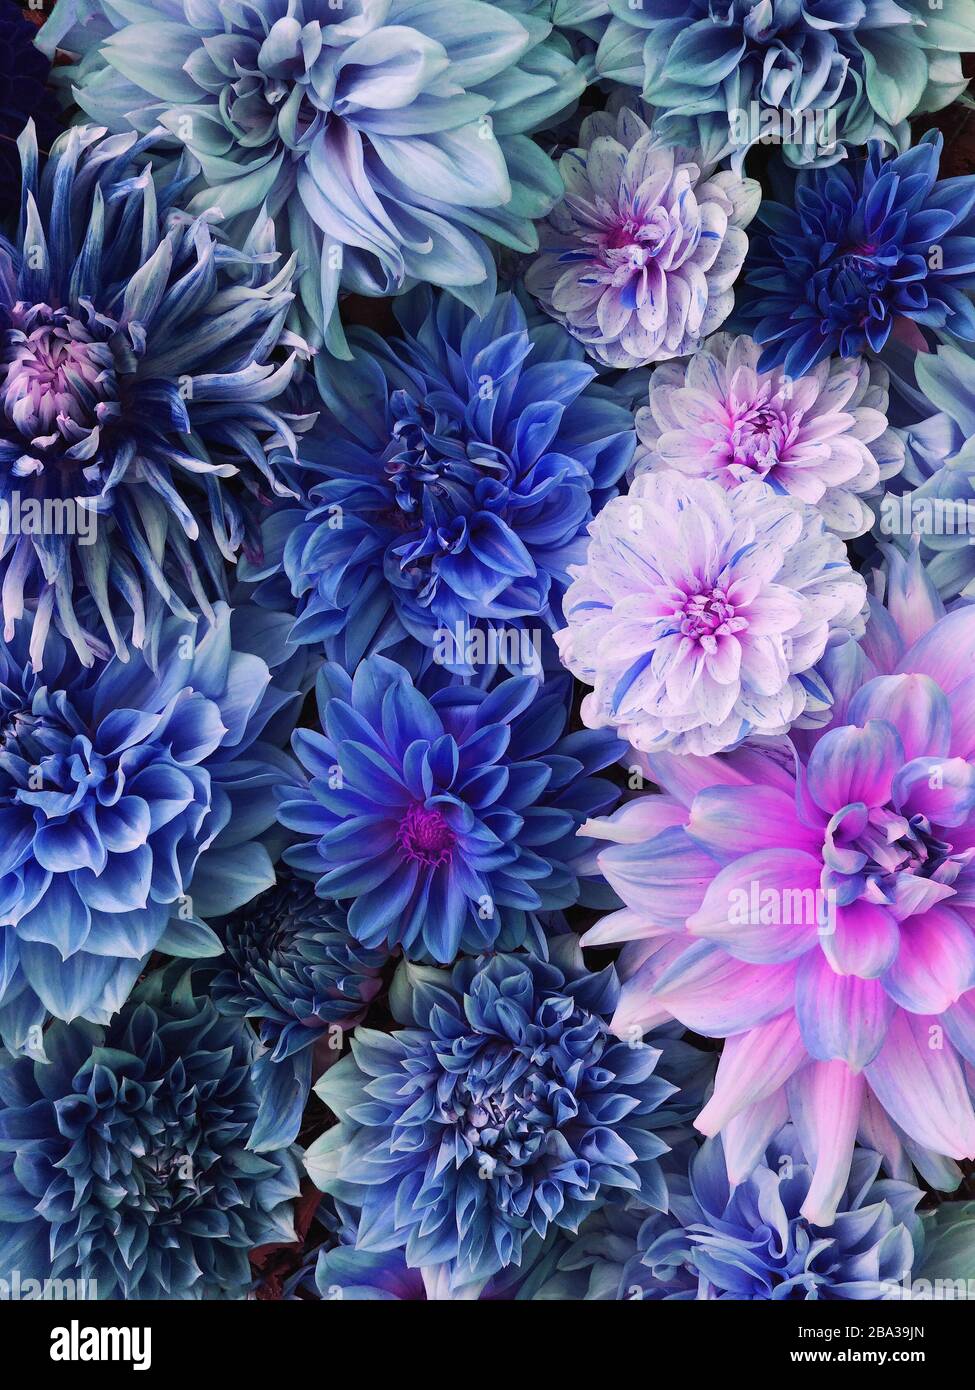 Colorful blue, white and purple dahlia flowers in full bloom. Stock Photo